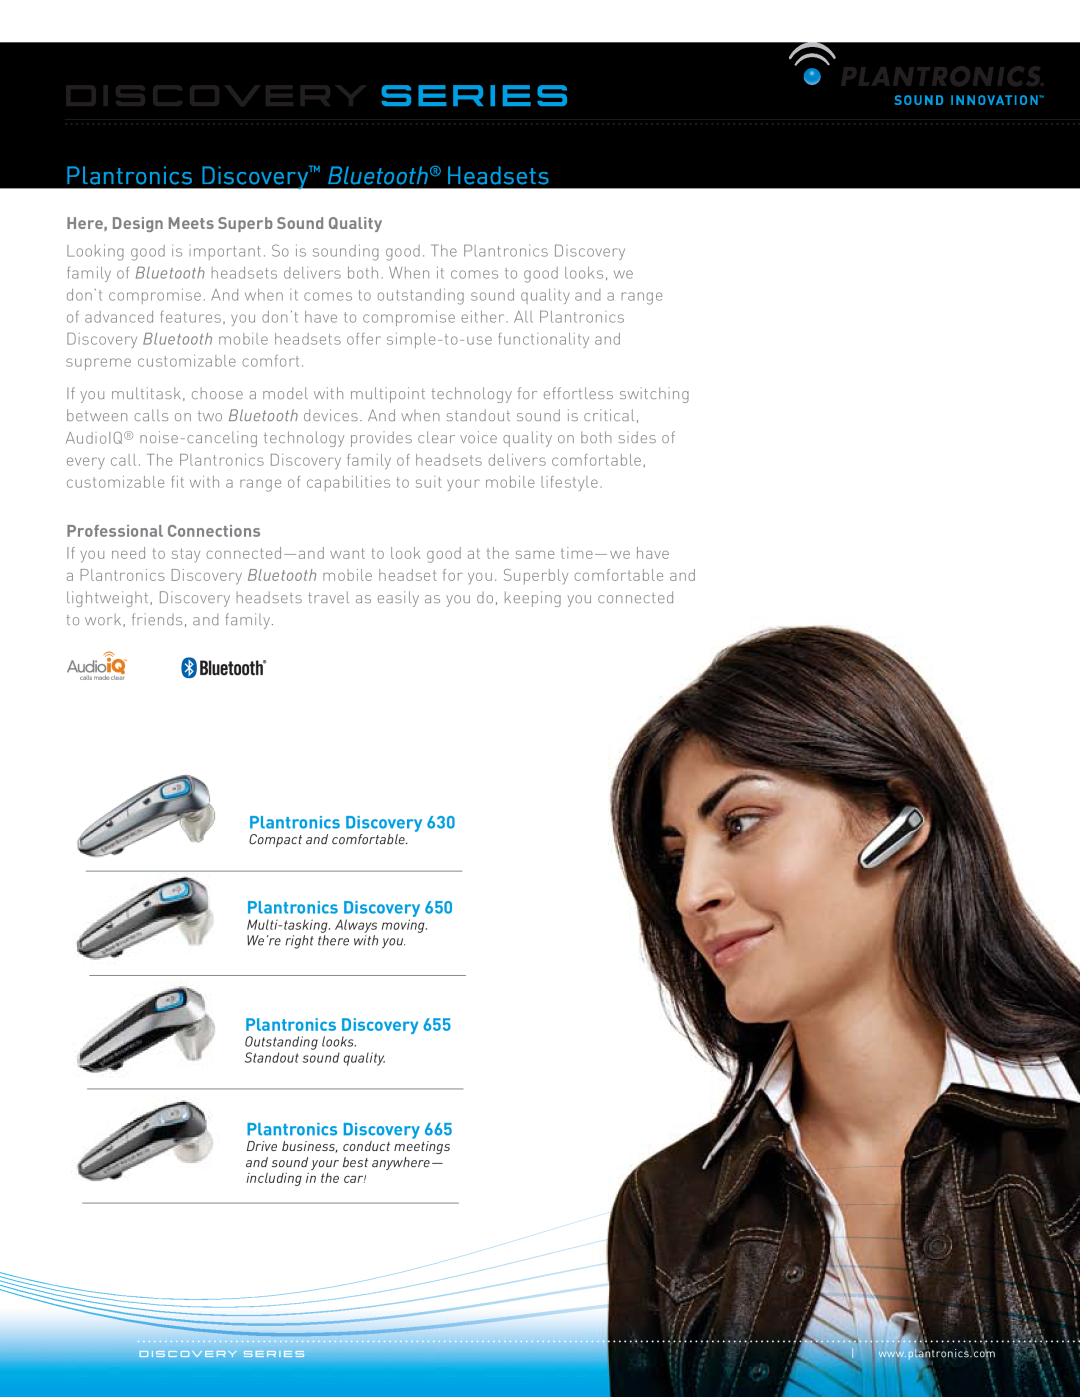 Plantronics 650 manual discovery Series, Plantronics Discovery Bluetooth Headsets, Here, Design Meets Superb Sound Quality 